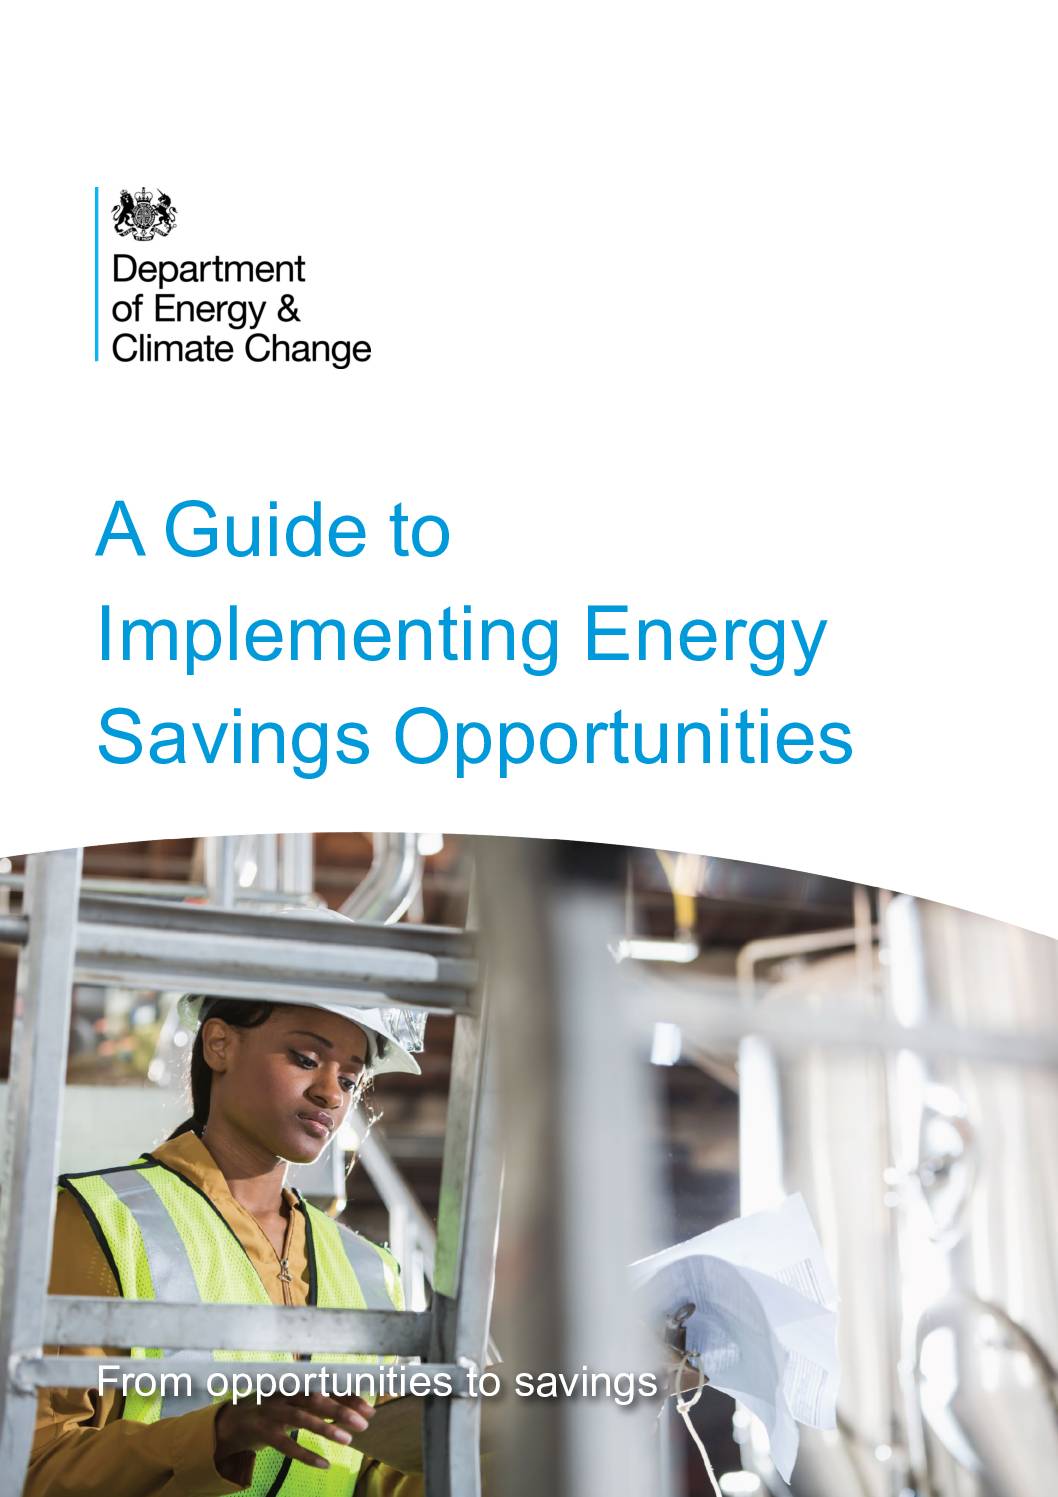 A Guide to Implementing Energy Savings Opportunities